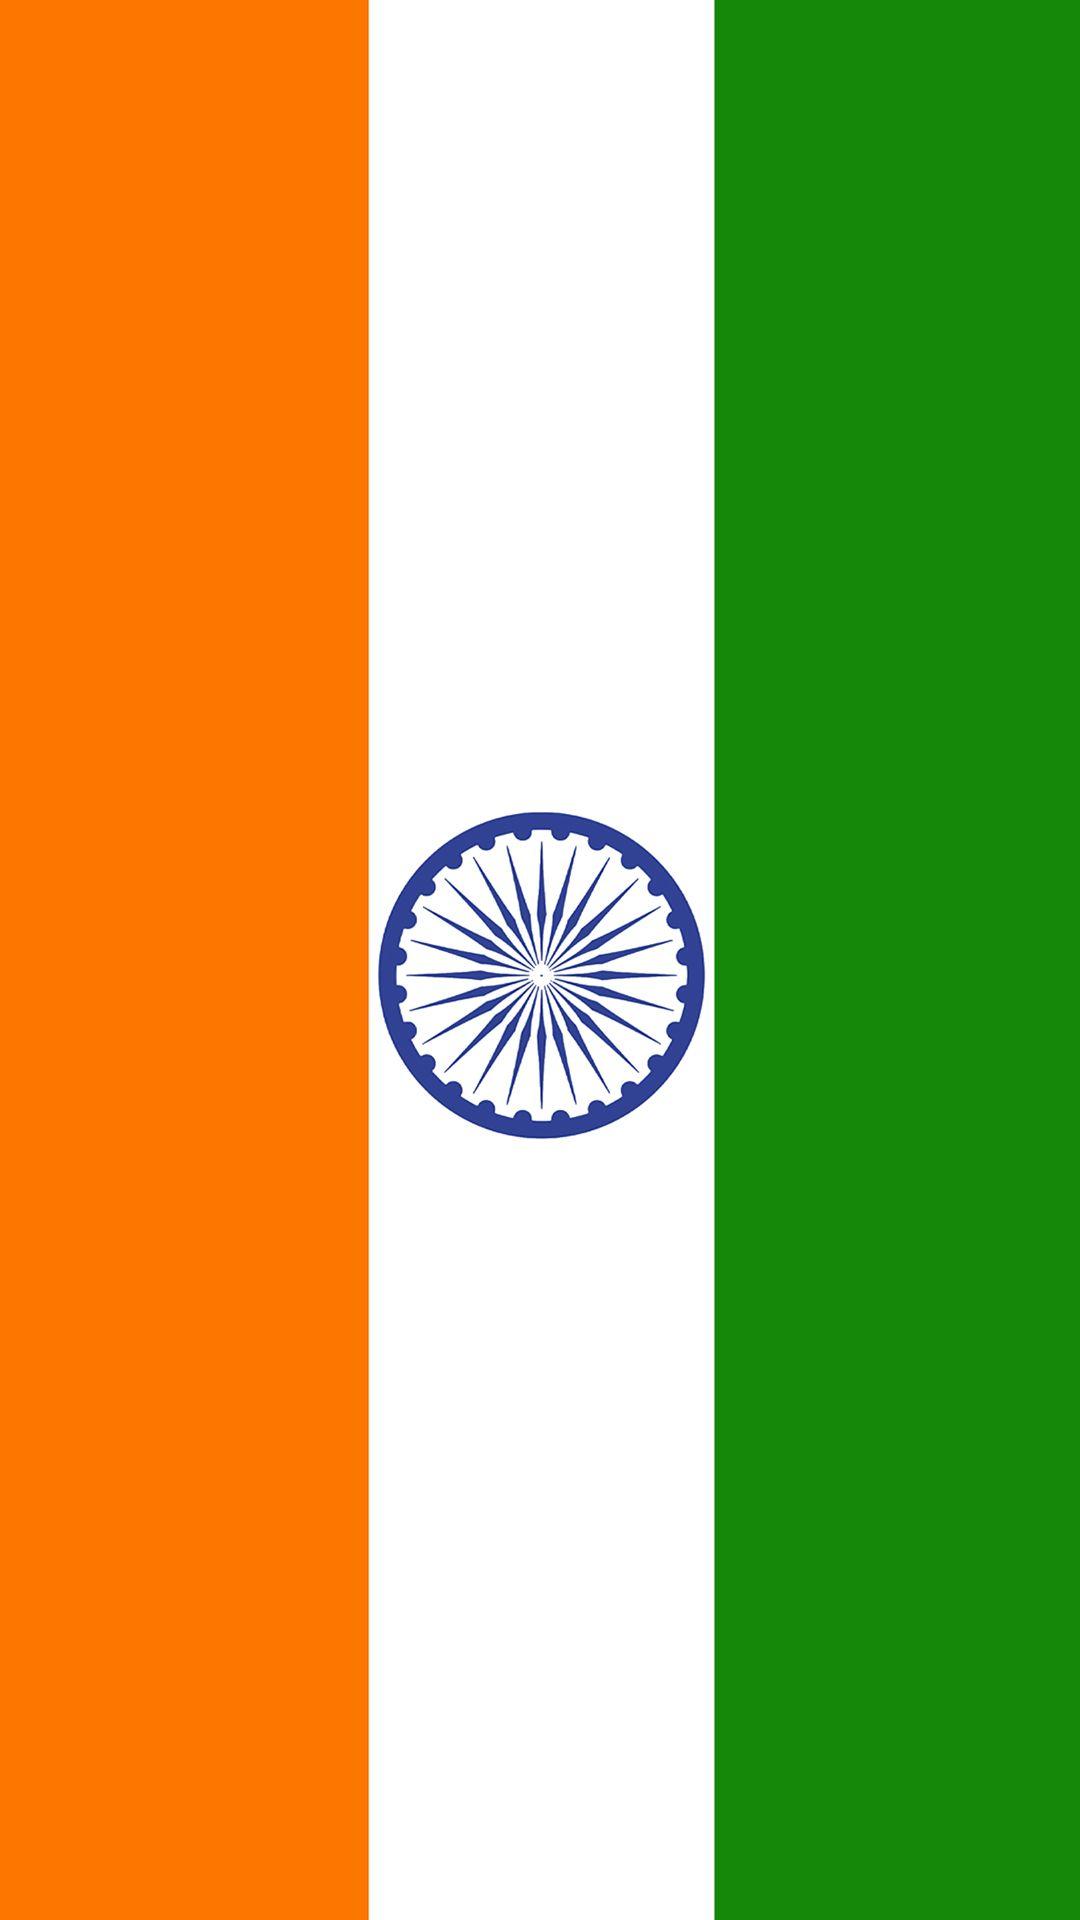 India Flag for Mobile Phone Wallpaper 12 of 17 India